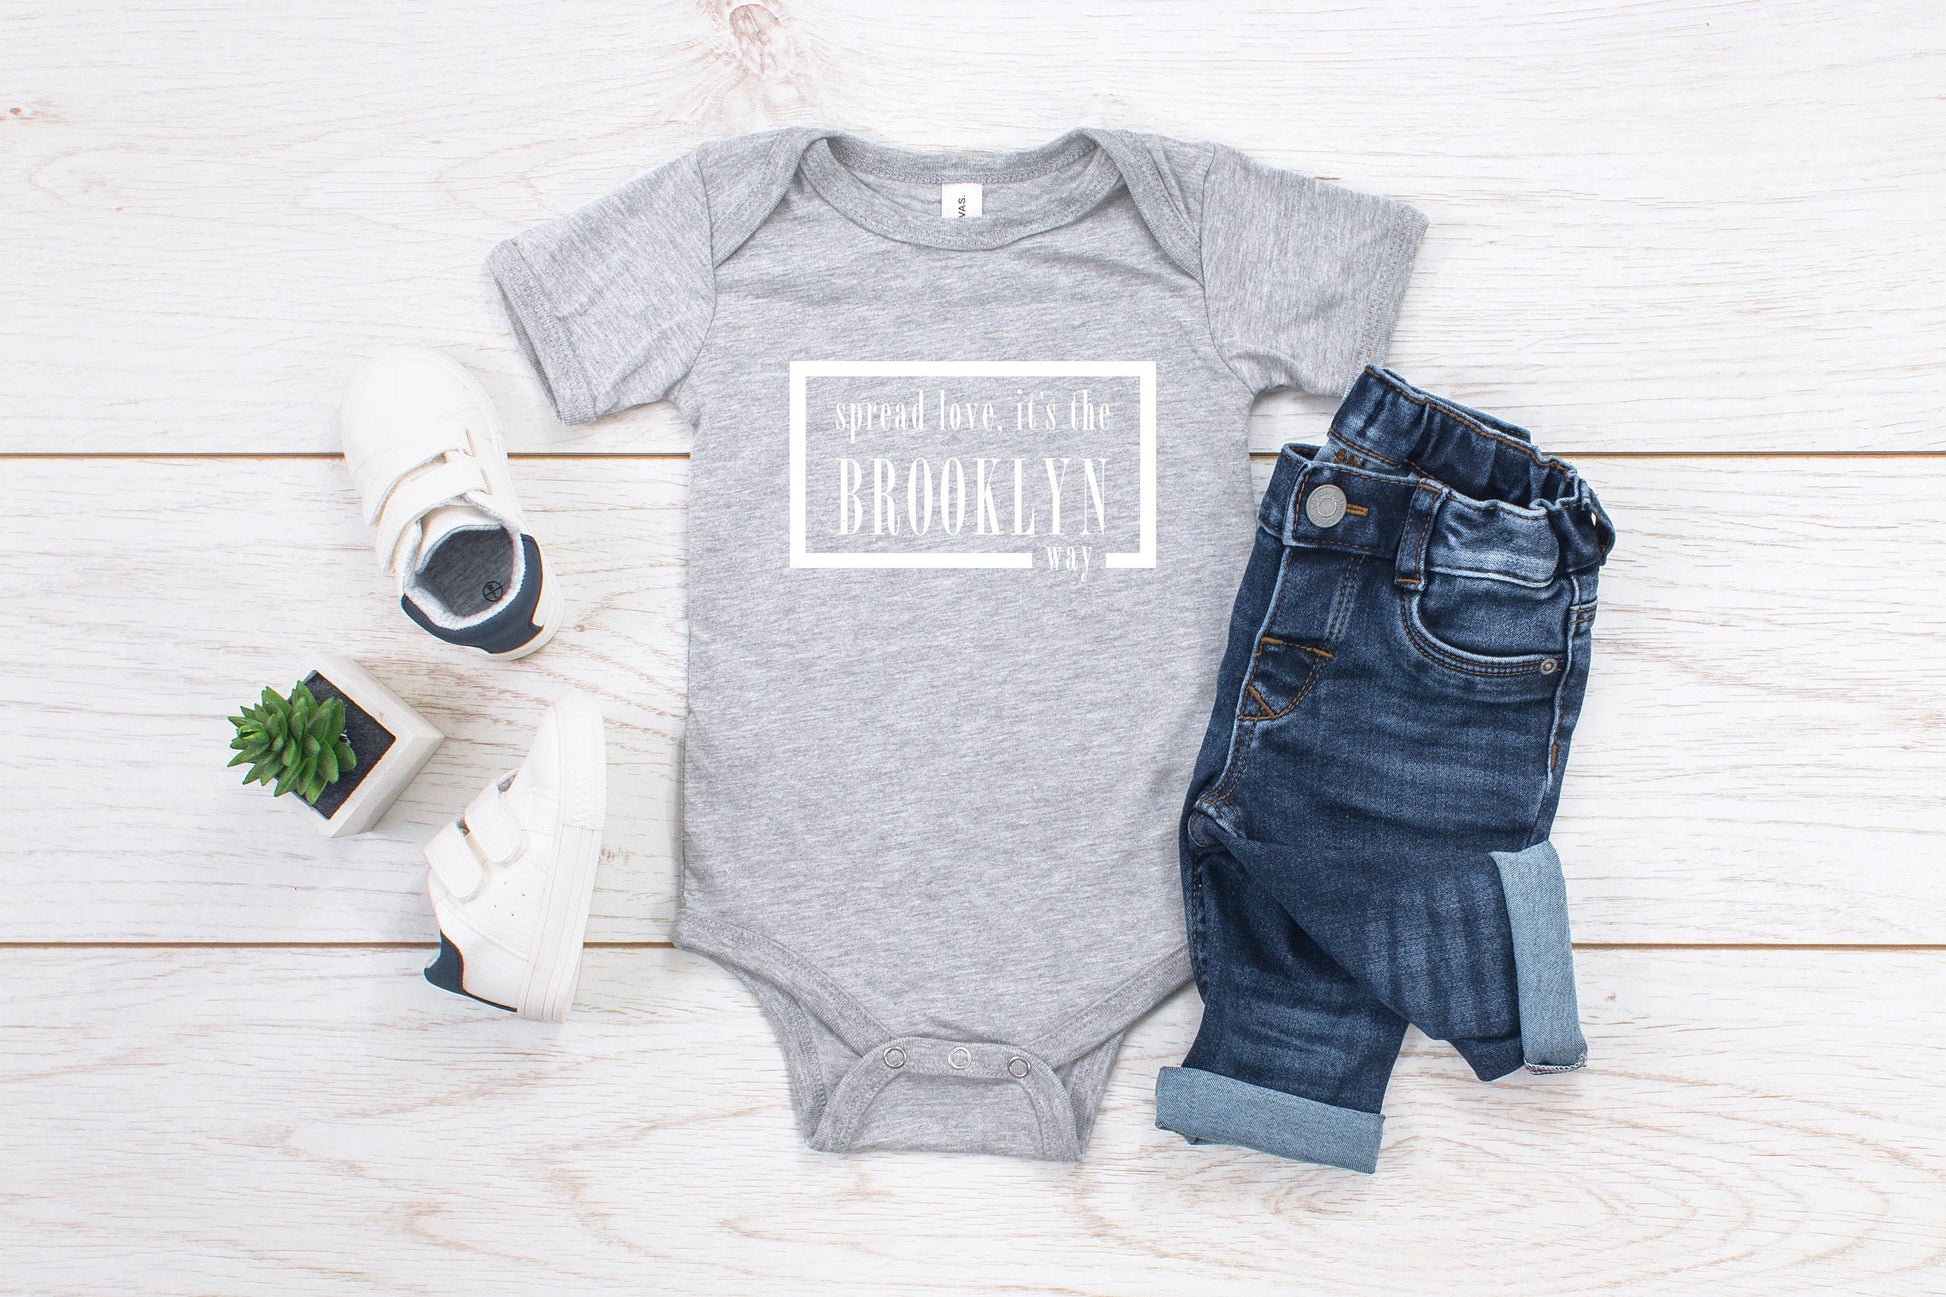 Grey baby romper that has white writing with spread love, it's the Brooklyn way. Surrounded by a white solid box.